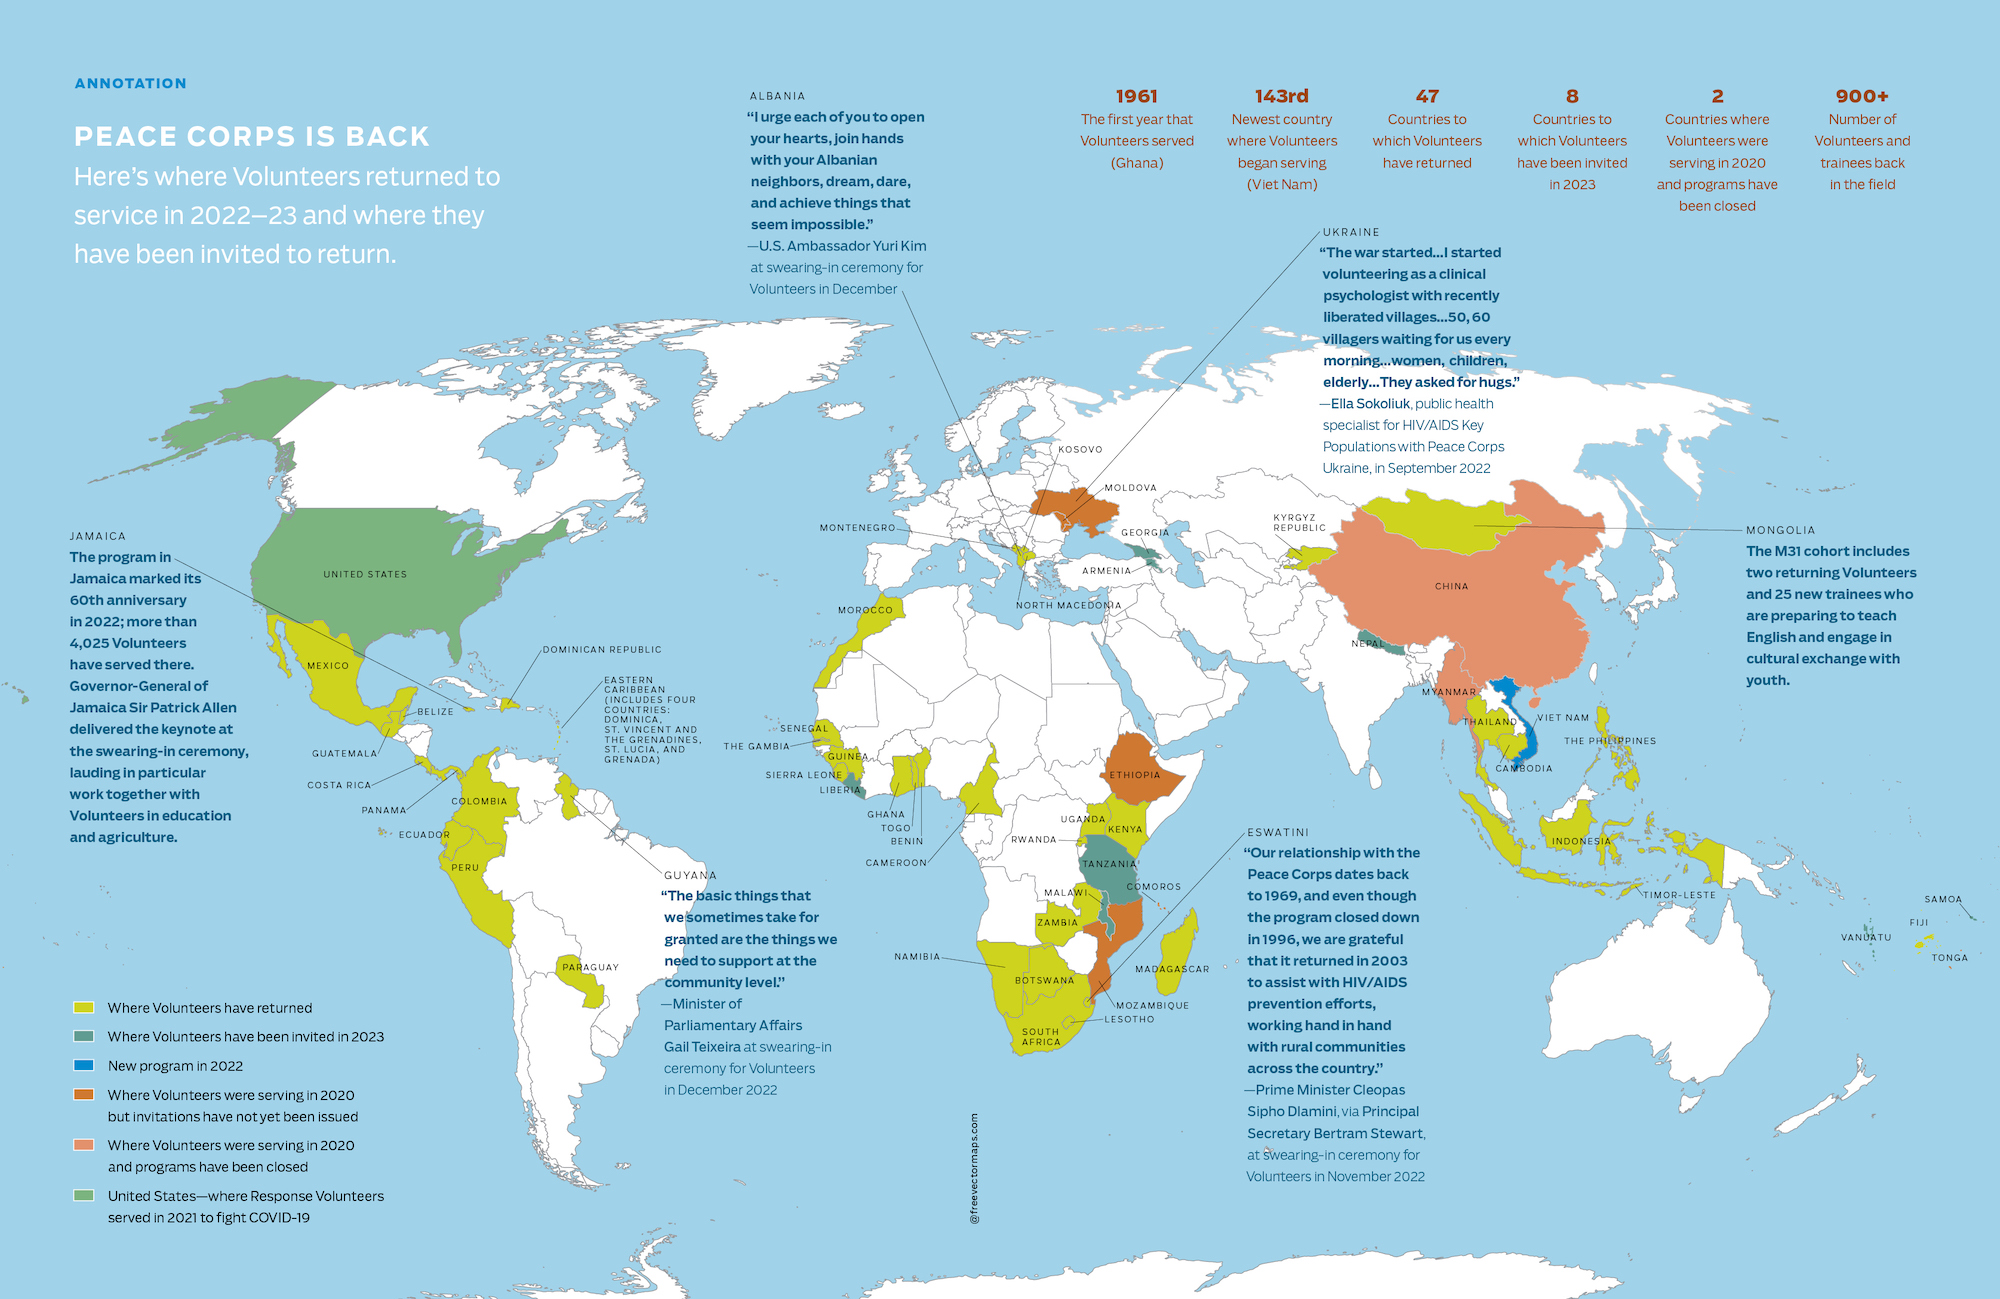 Map of the world showing countries where Peace Corps Volunteers have returned